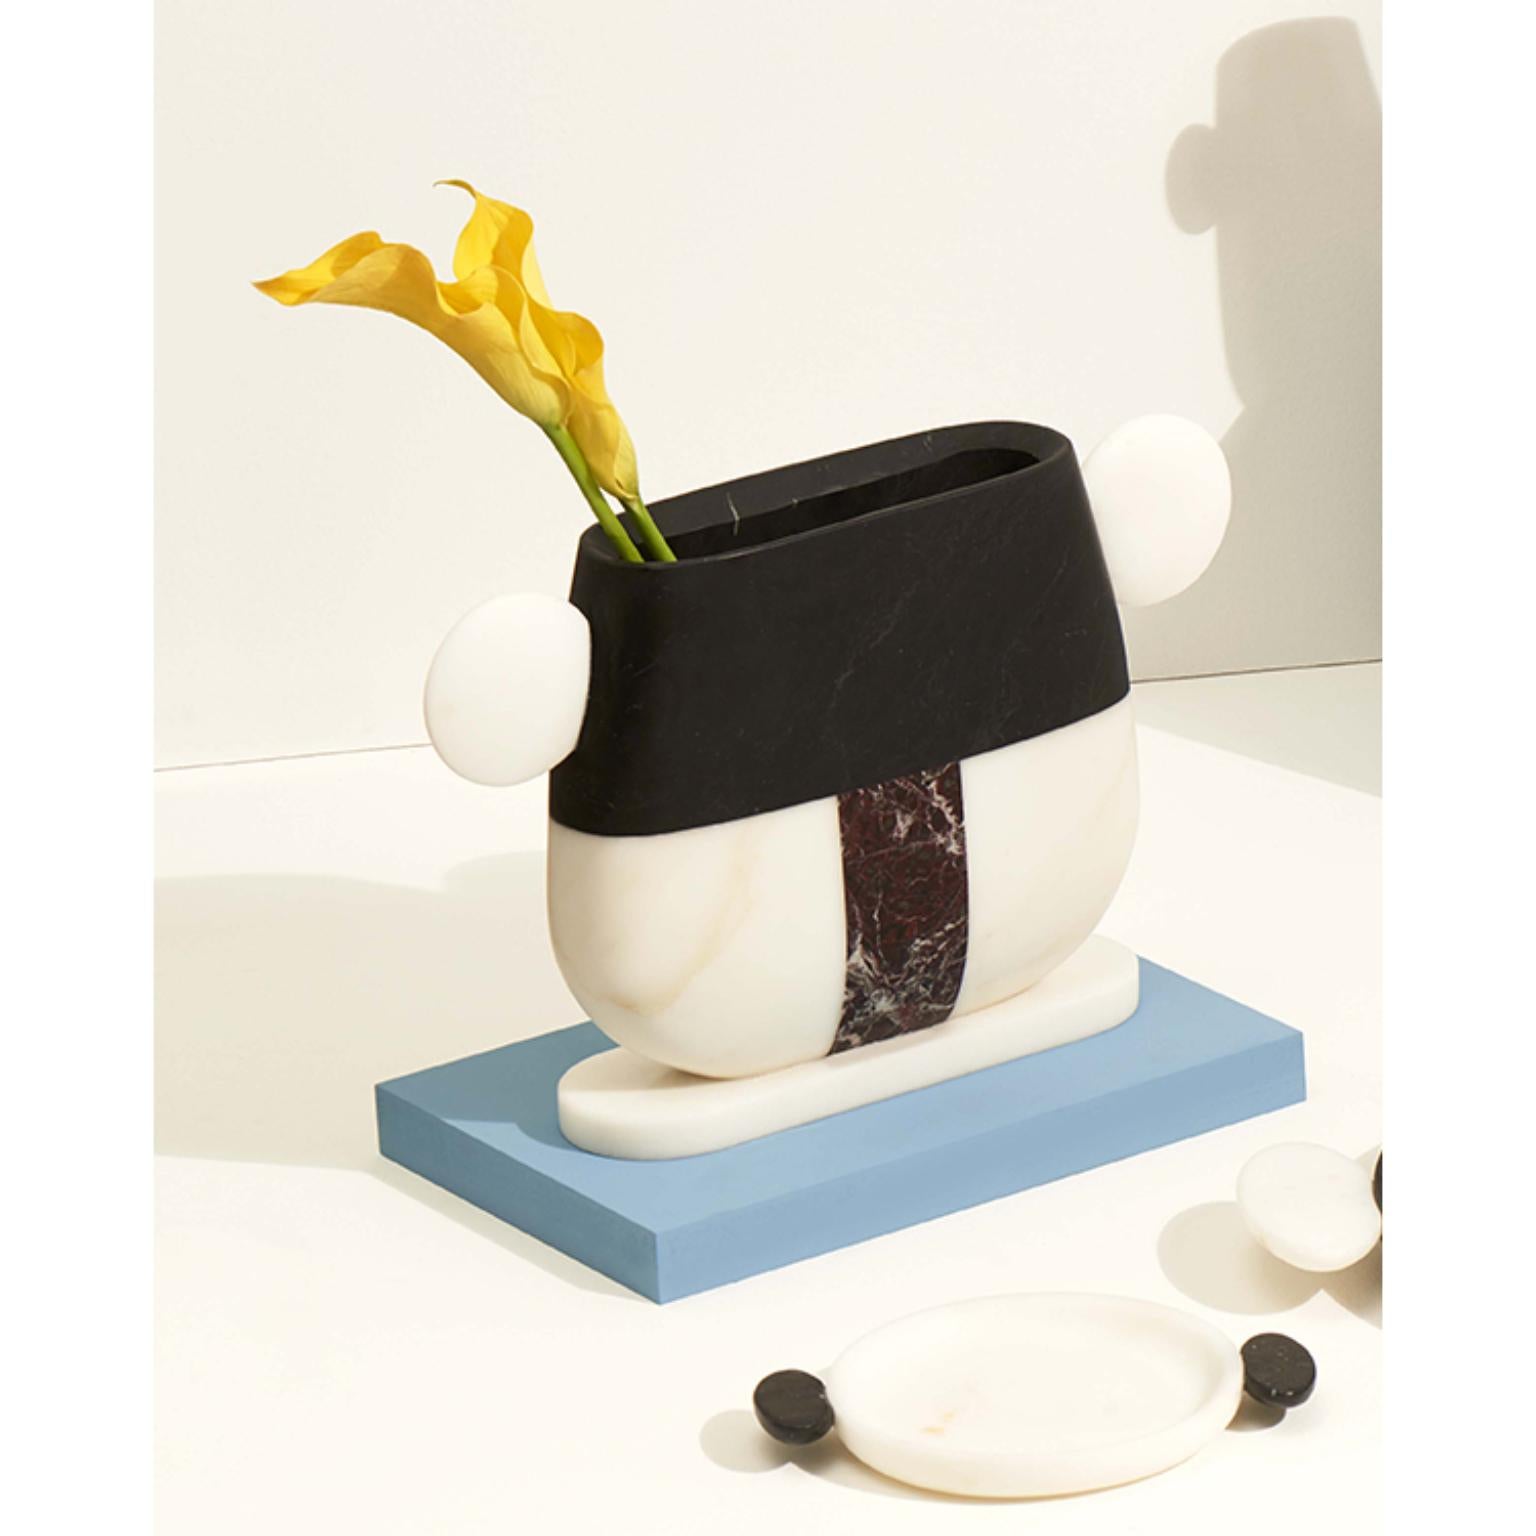 Taca marble vase by Matteo Cibic
Dimensions: 38.2 x 7.3 x 23.4 cm
Materials: Nero Marquinia, Bianco Michelangelo

Vases made of various marbles cannot guarantee watertightness, better not use for cut flowers unless with the use vials for each flower